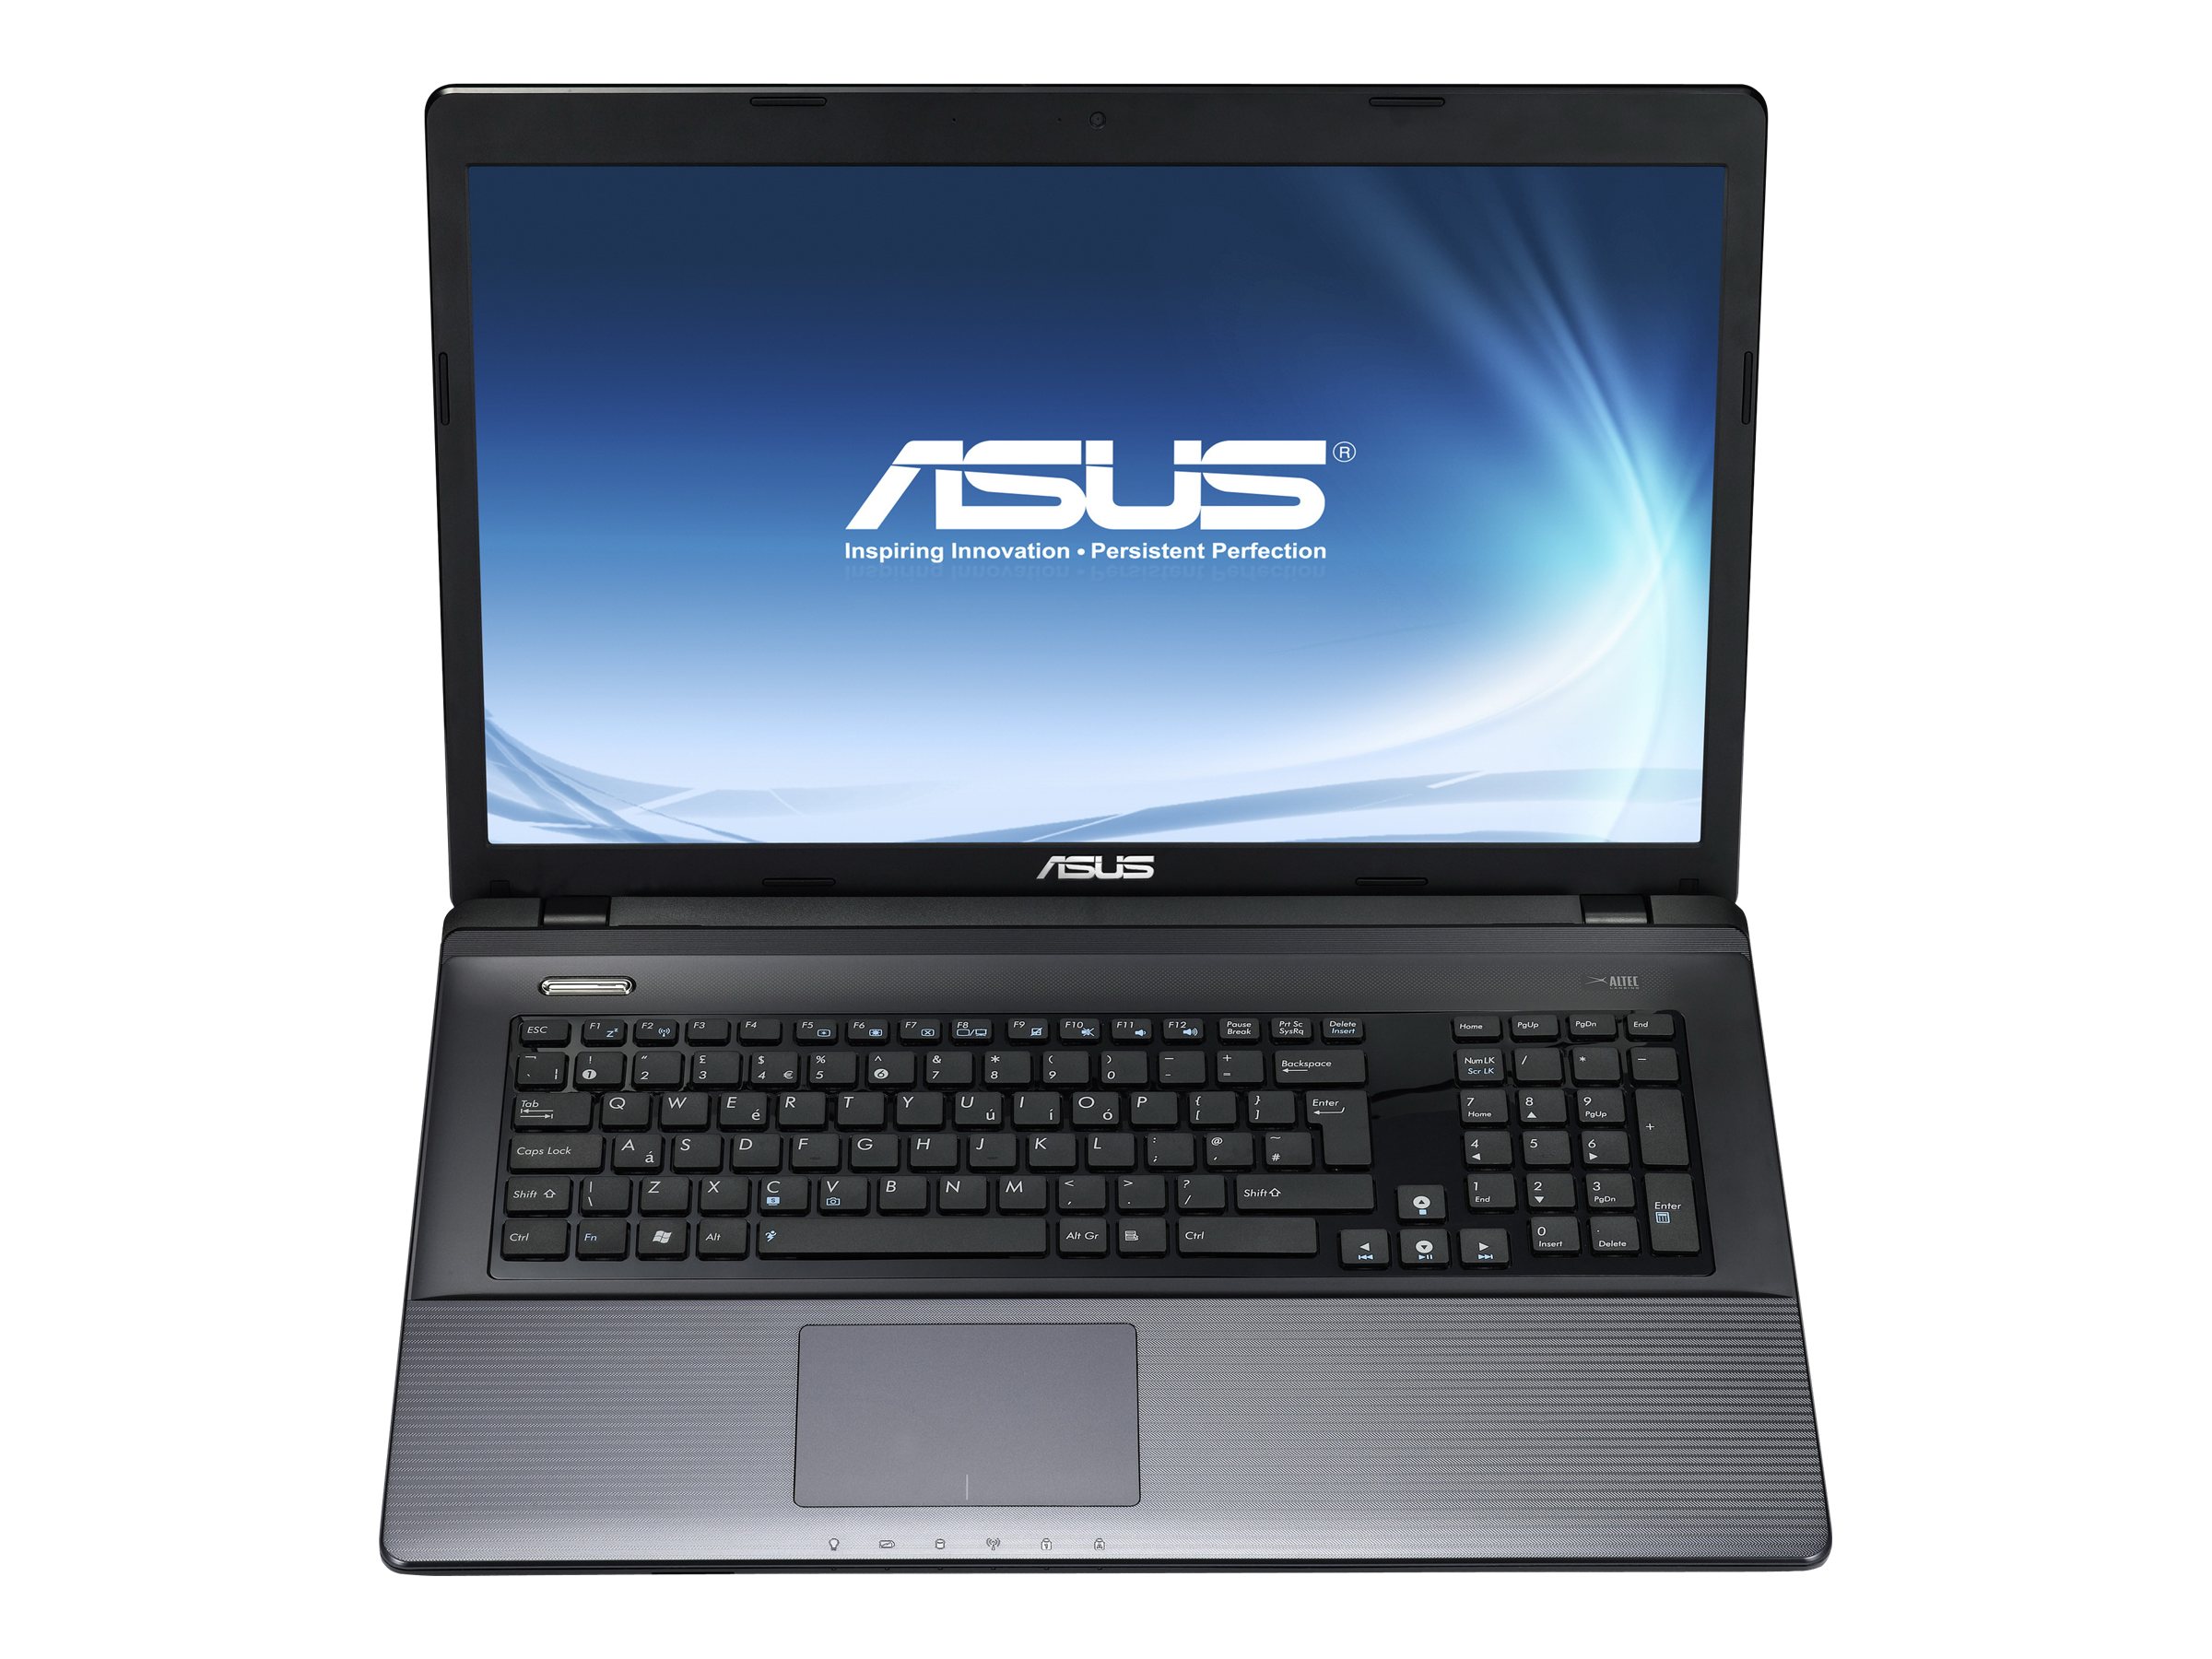 Asus product